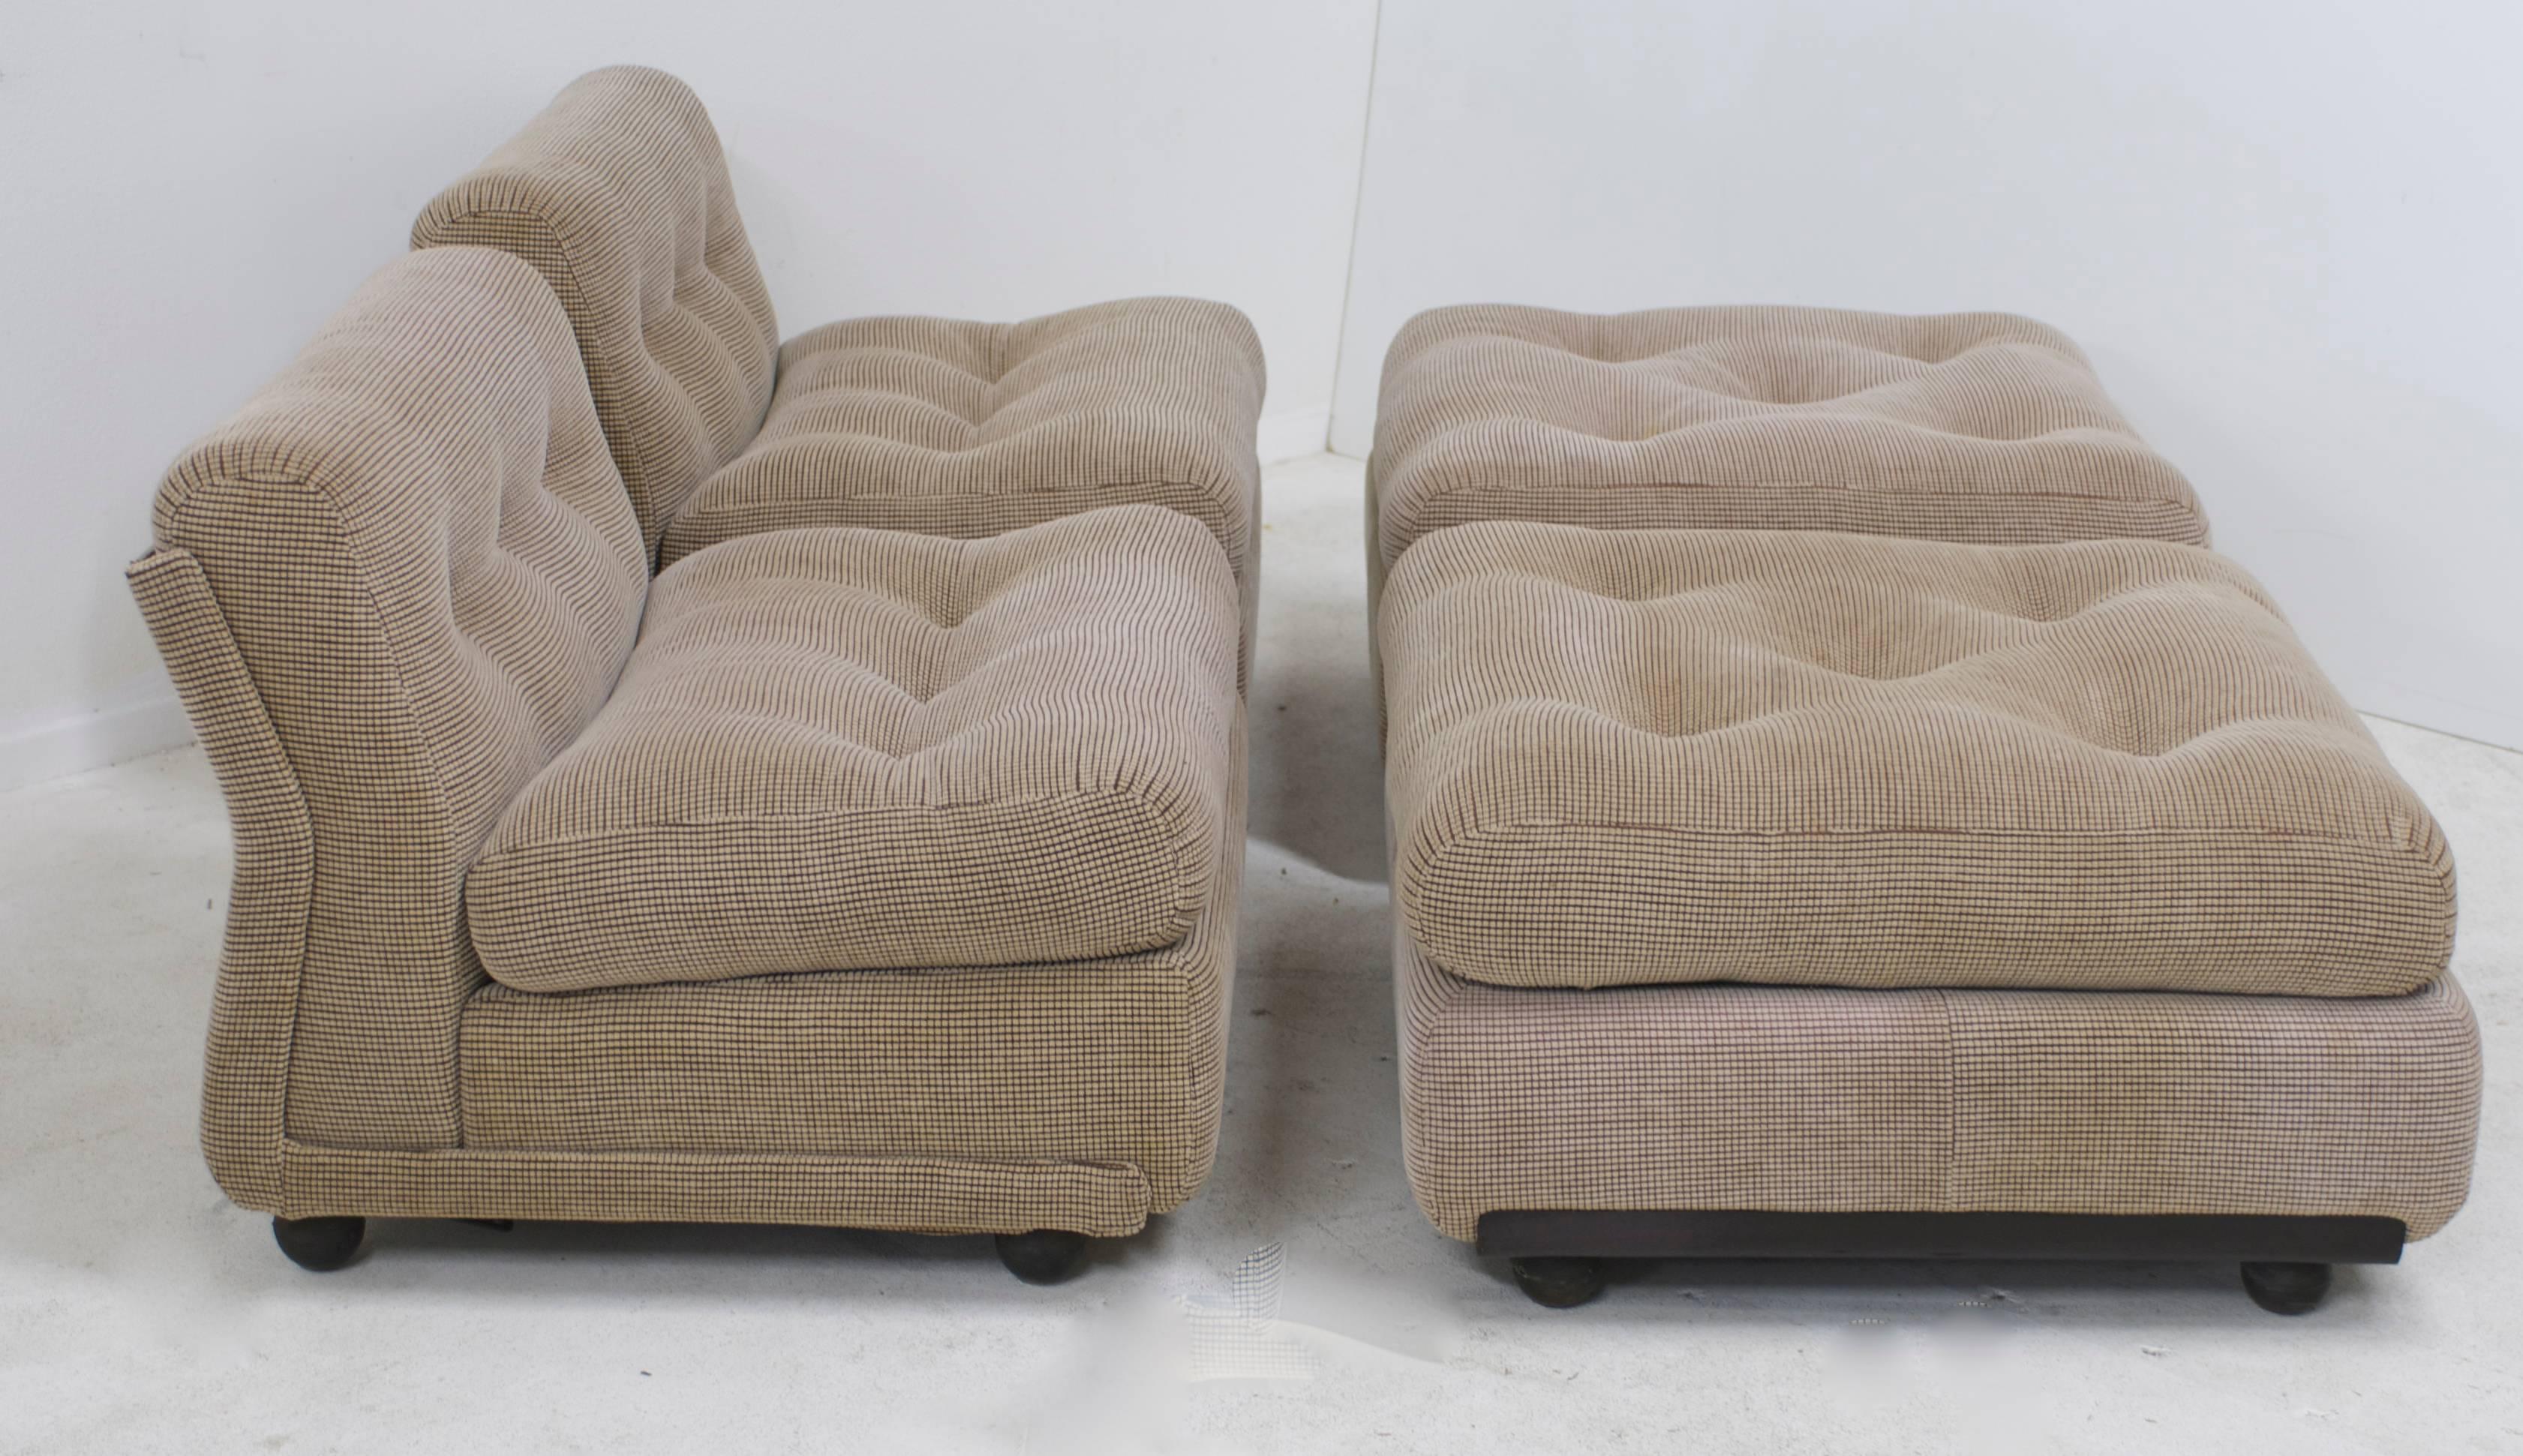 A pair of very comfortable 1970s era Amanta lounge chairs and ottomans designed by Mario Bellini and manufactured in Italy for B&B Italia. The fiberglass form is covered in the original fabric, a fine cut velvet micro grid dot pattern which has been